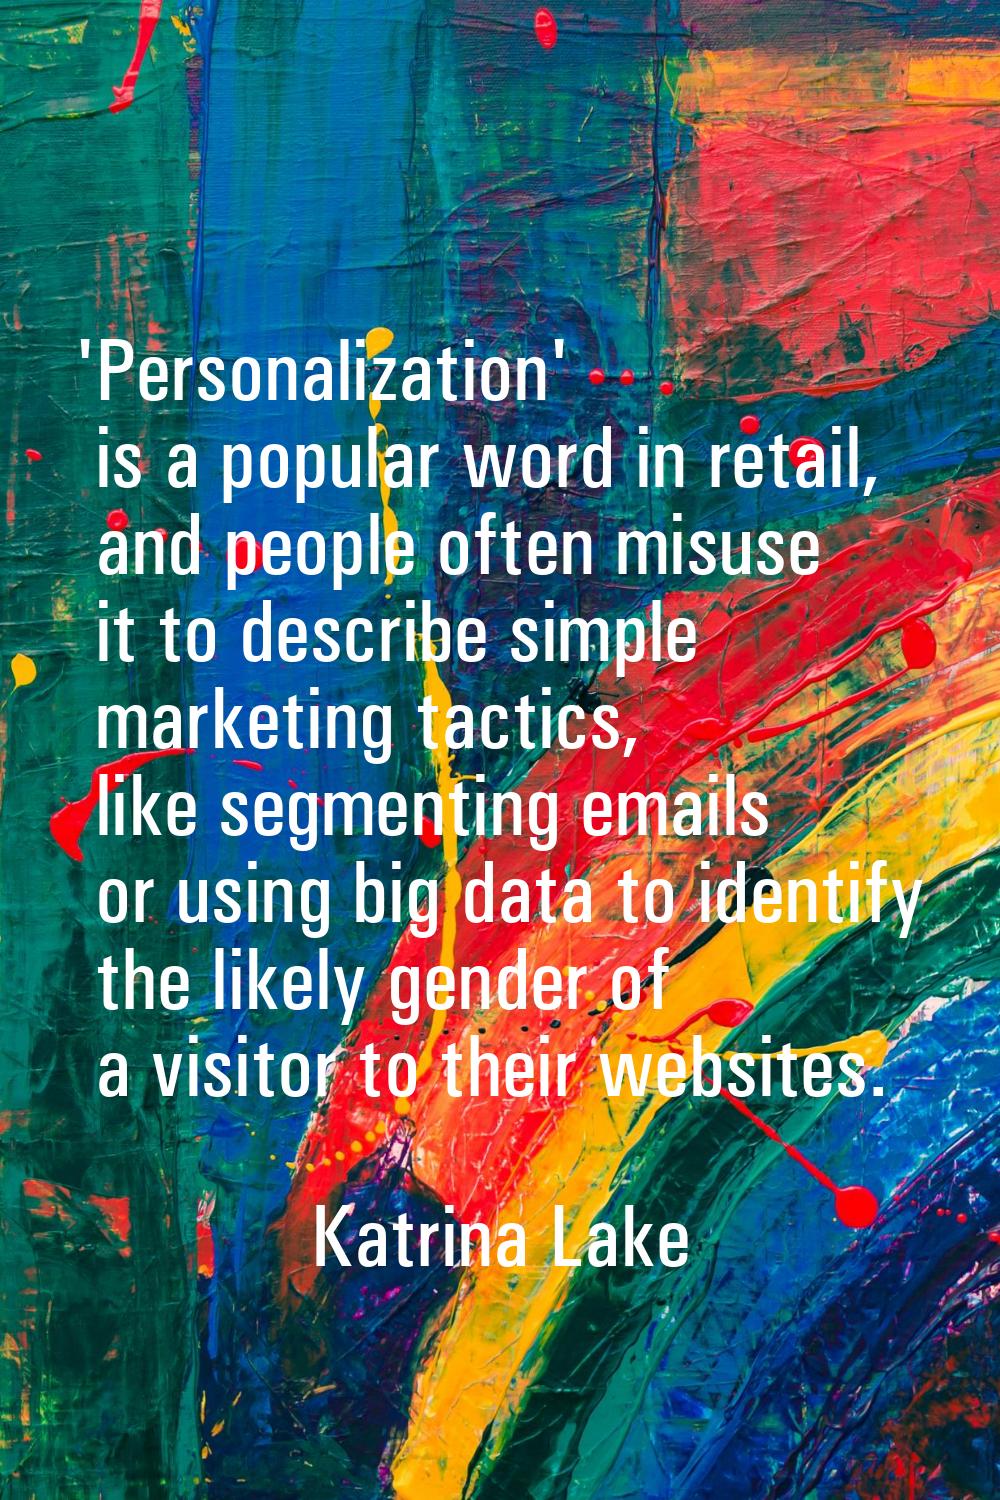 'Personalization' is a popular word in retail, and people often misuse it to describe simple market